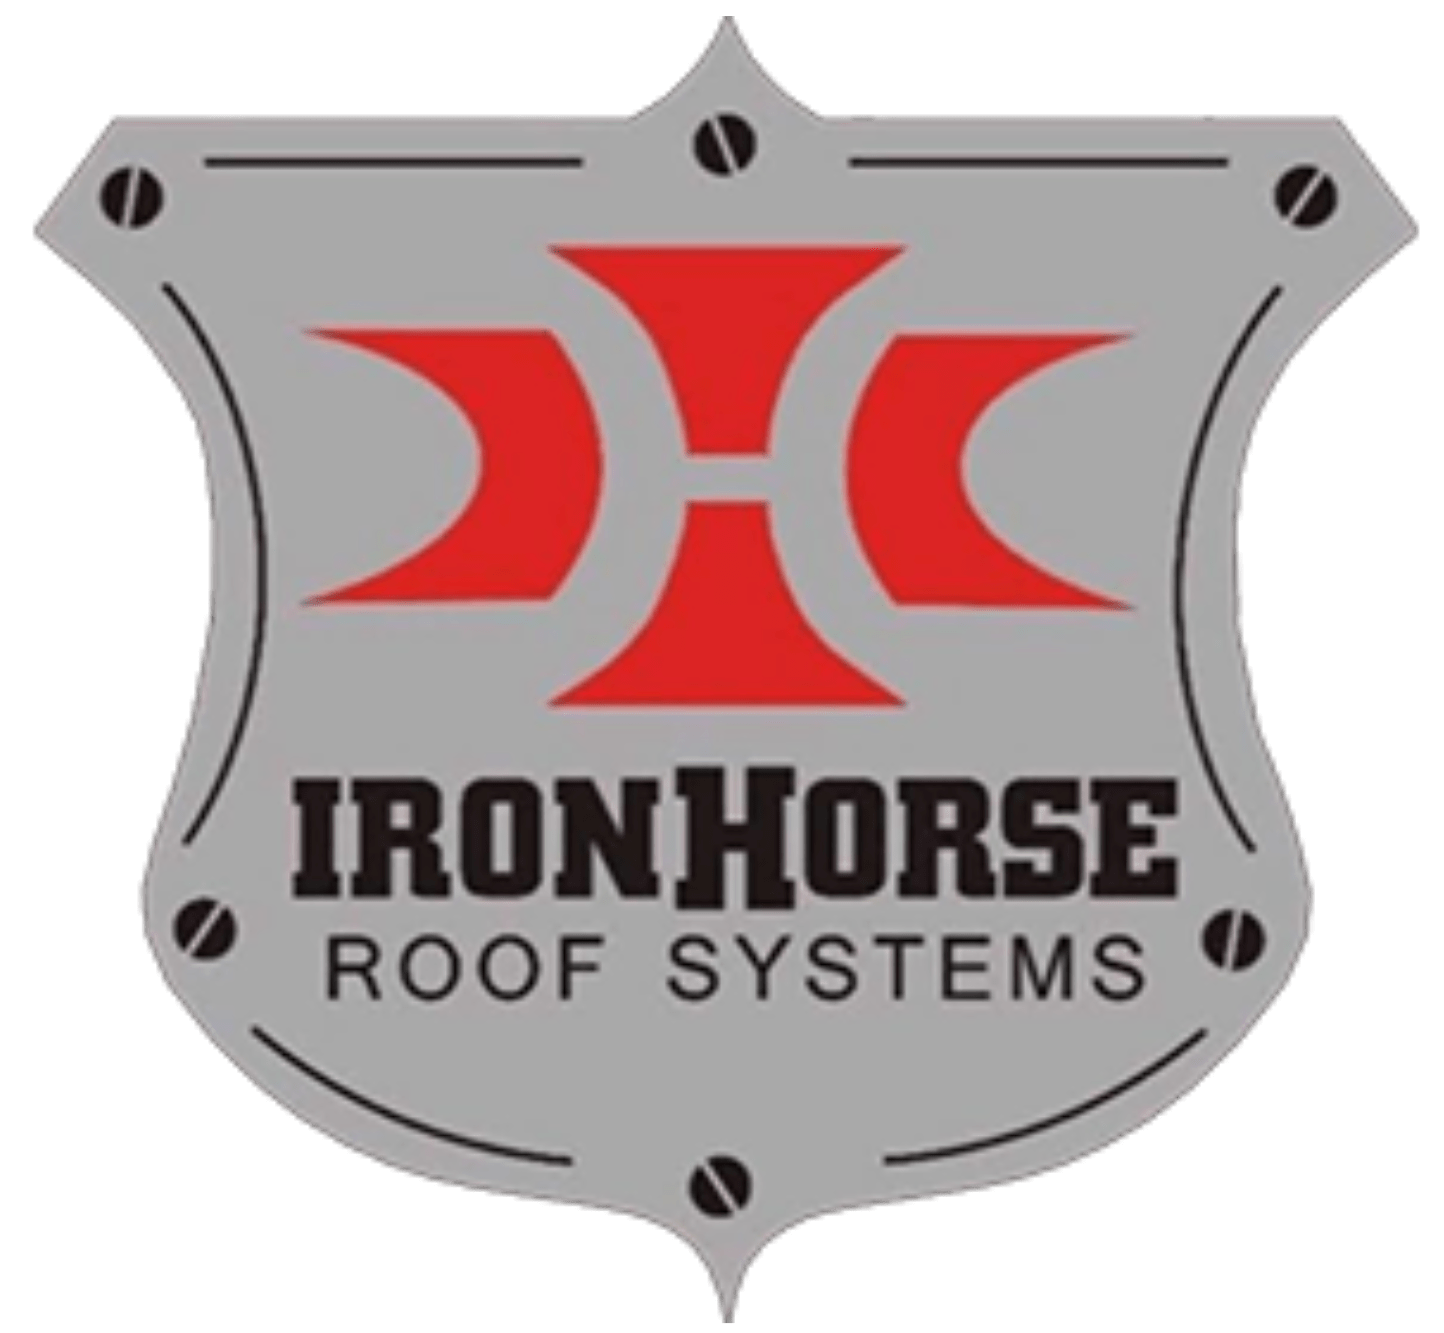 Roofing Waco TX for 13+ Years! Roof Replacements and Remodels